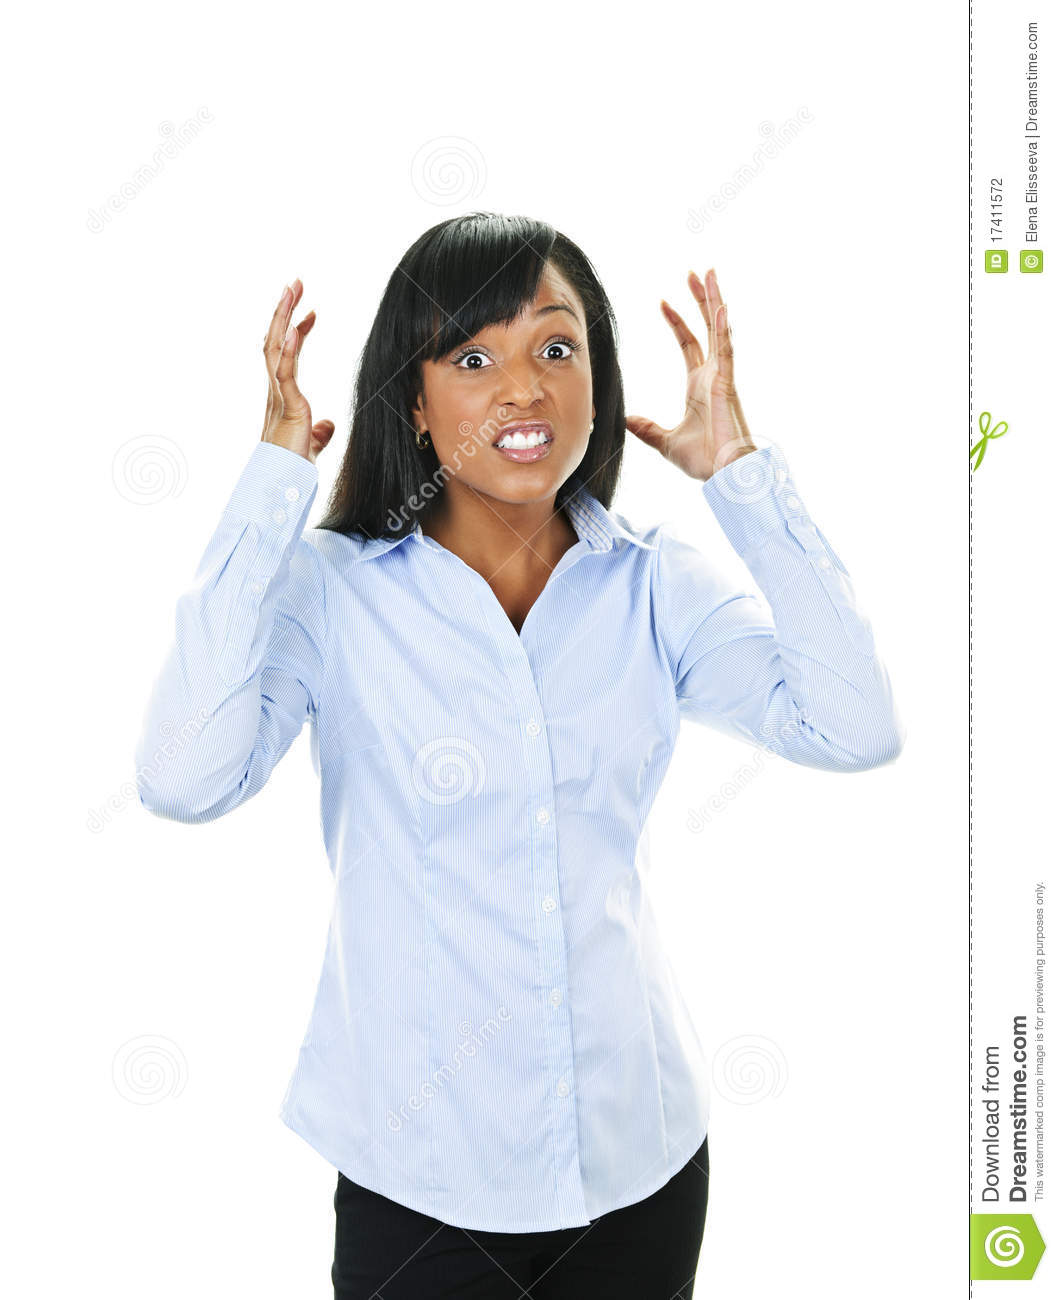 Frustrated Black Woman With Arms Raised Isolated On White Background